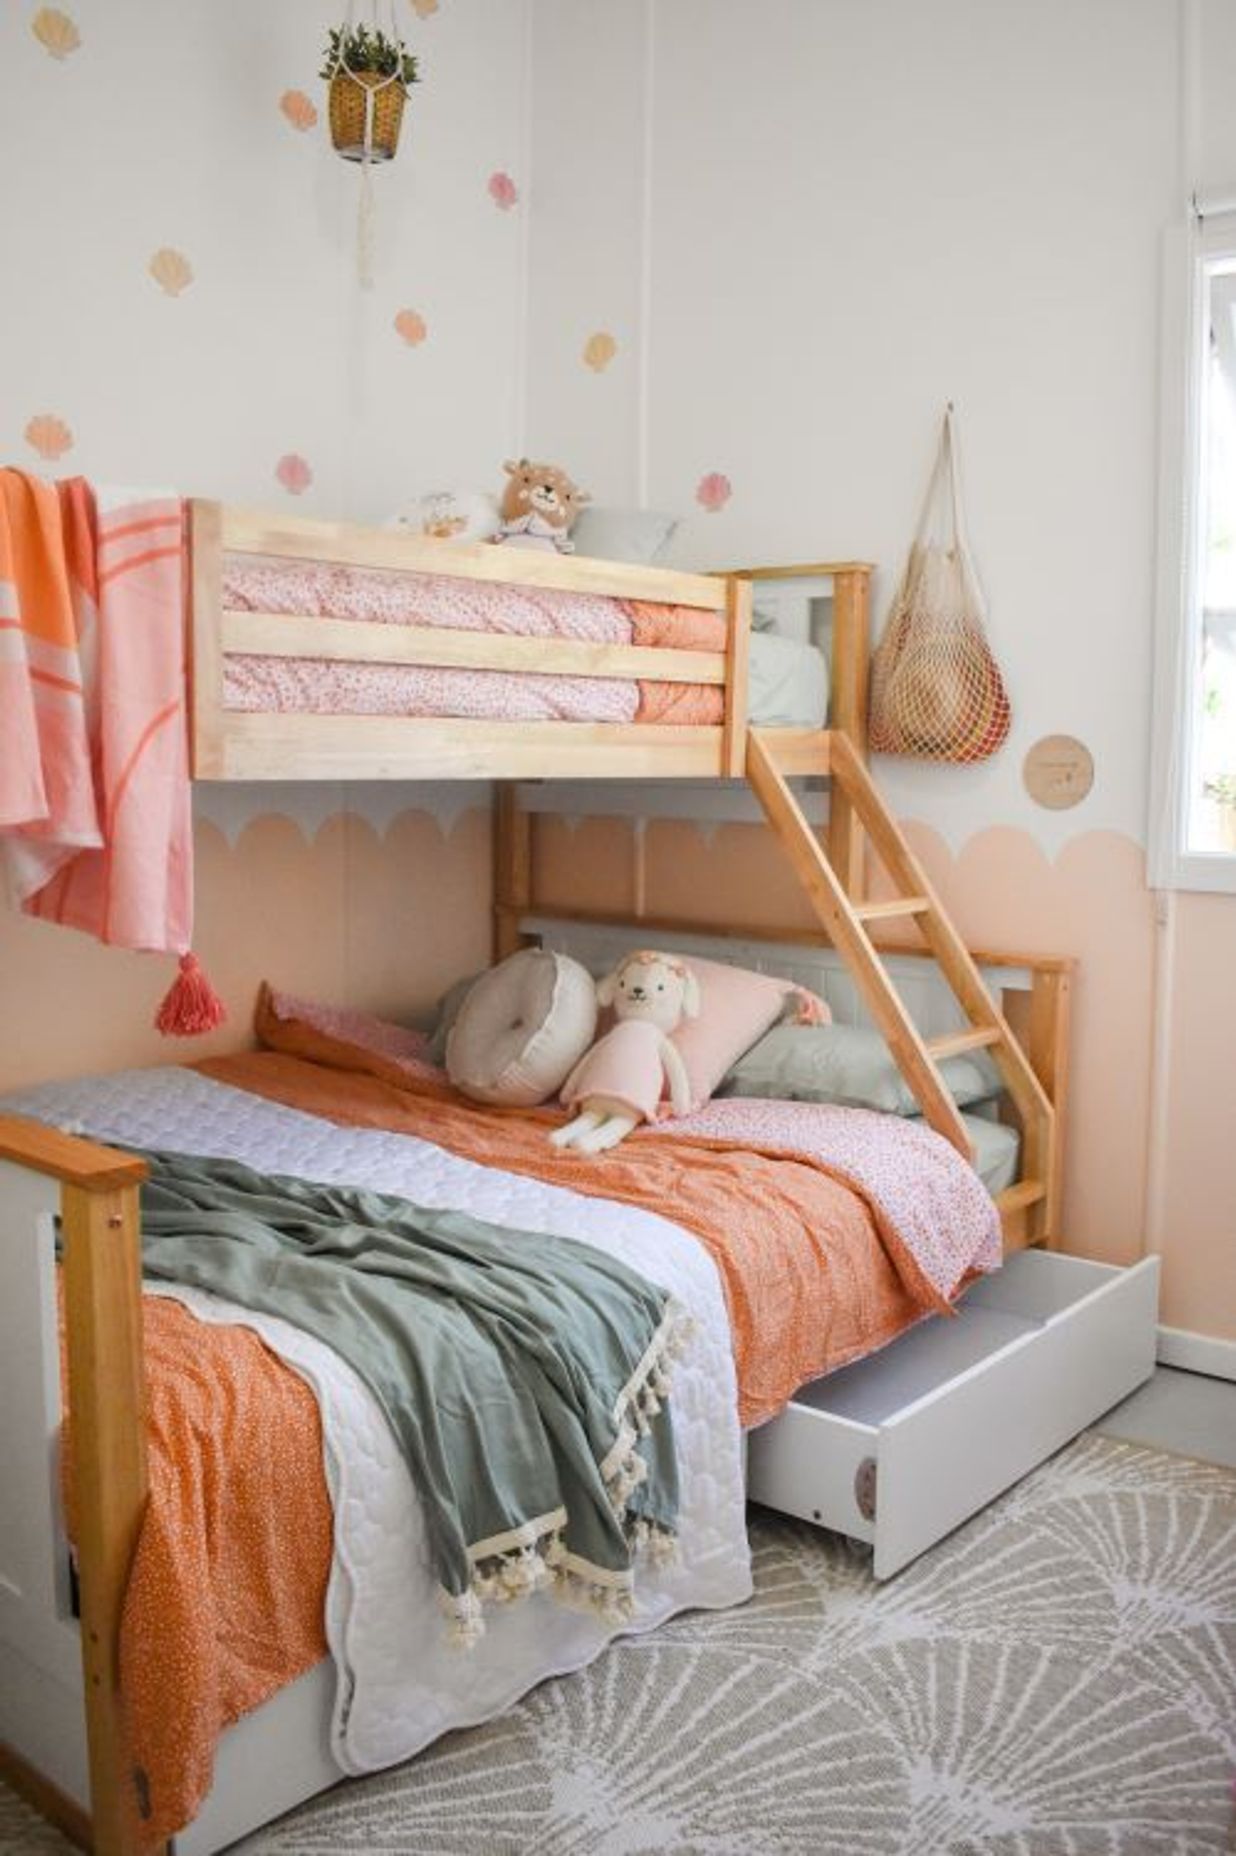 How To Optimise Space In Your Kids Bedroom with Bunk Beds | B2C Furniture x My Little Joy